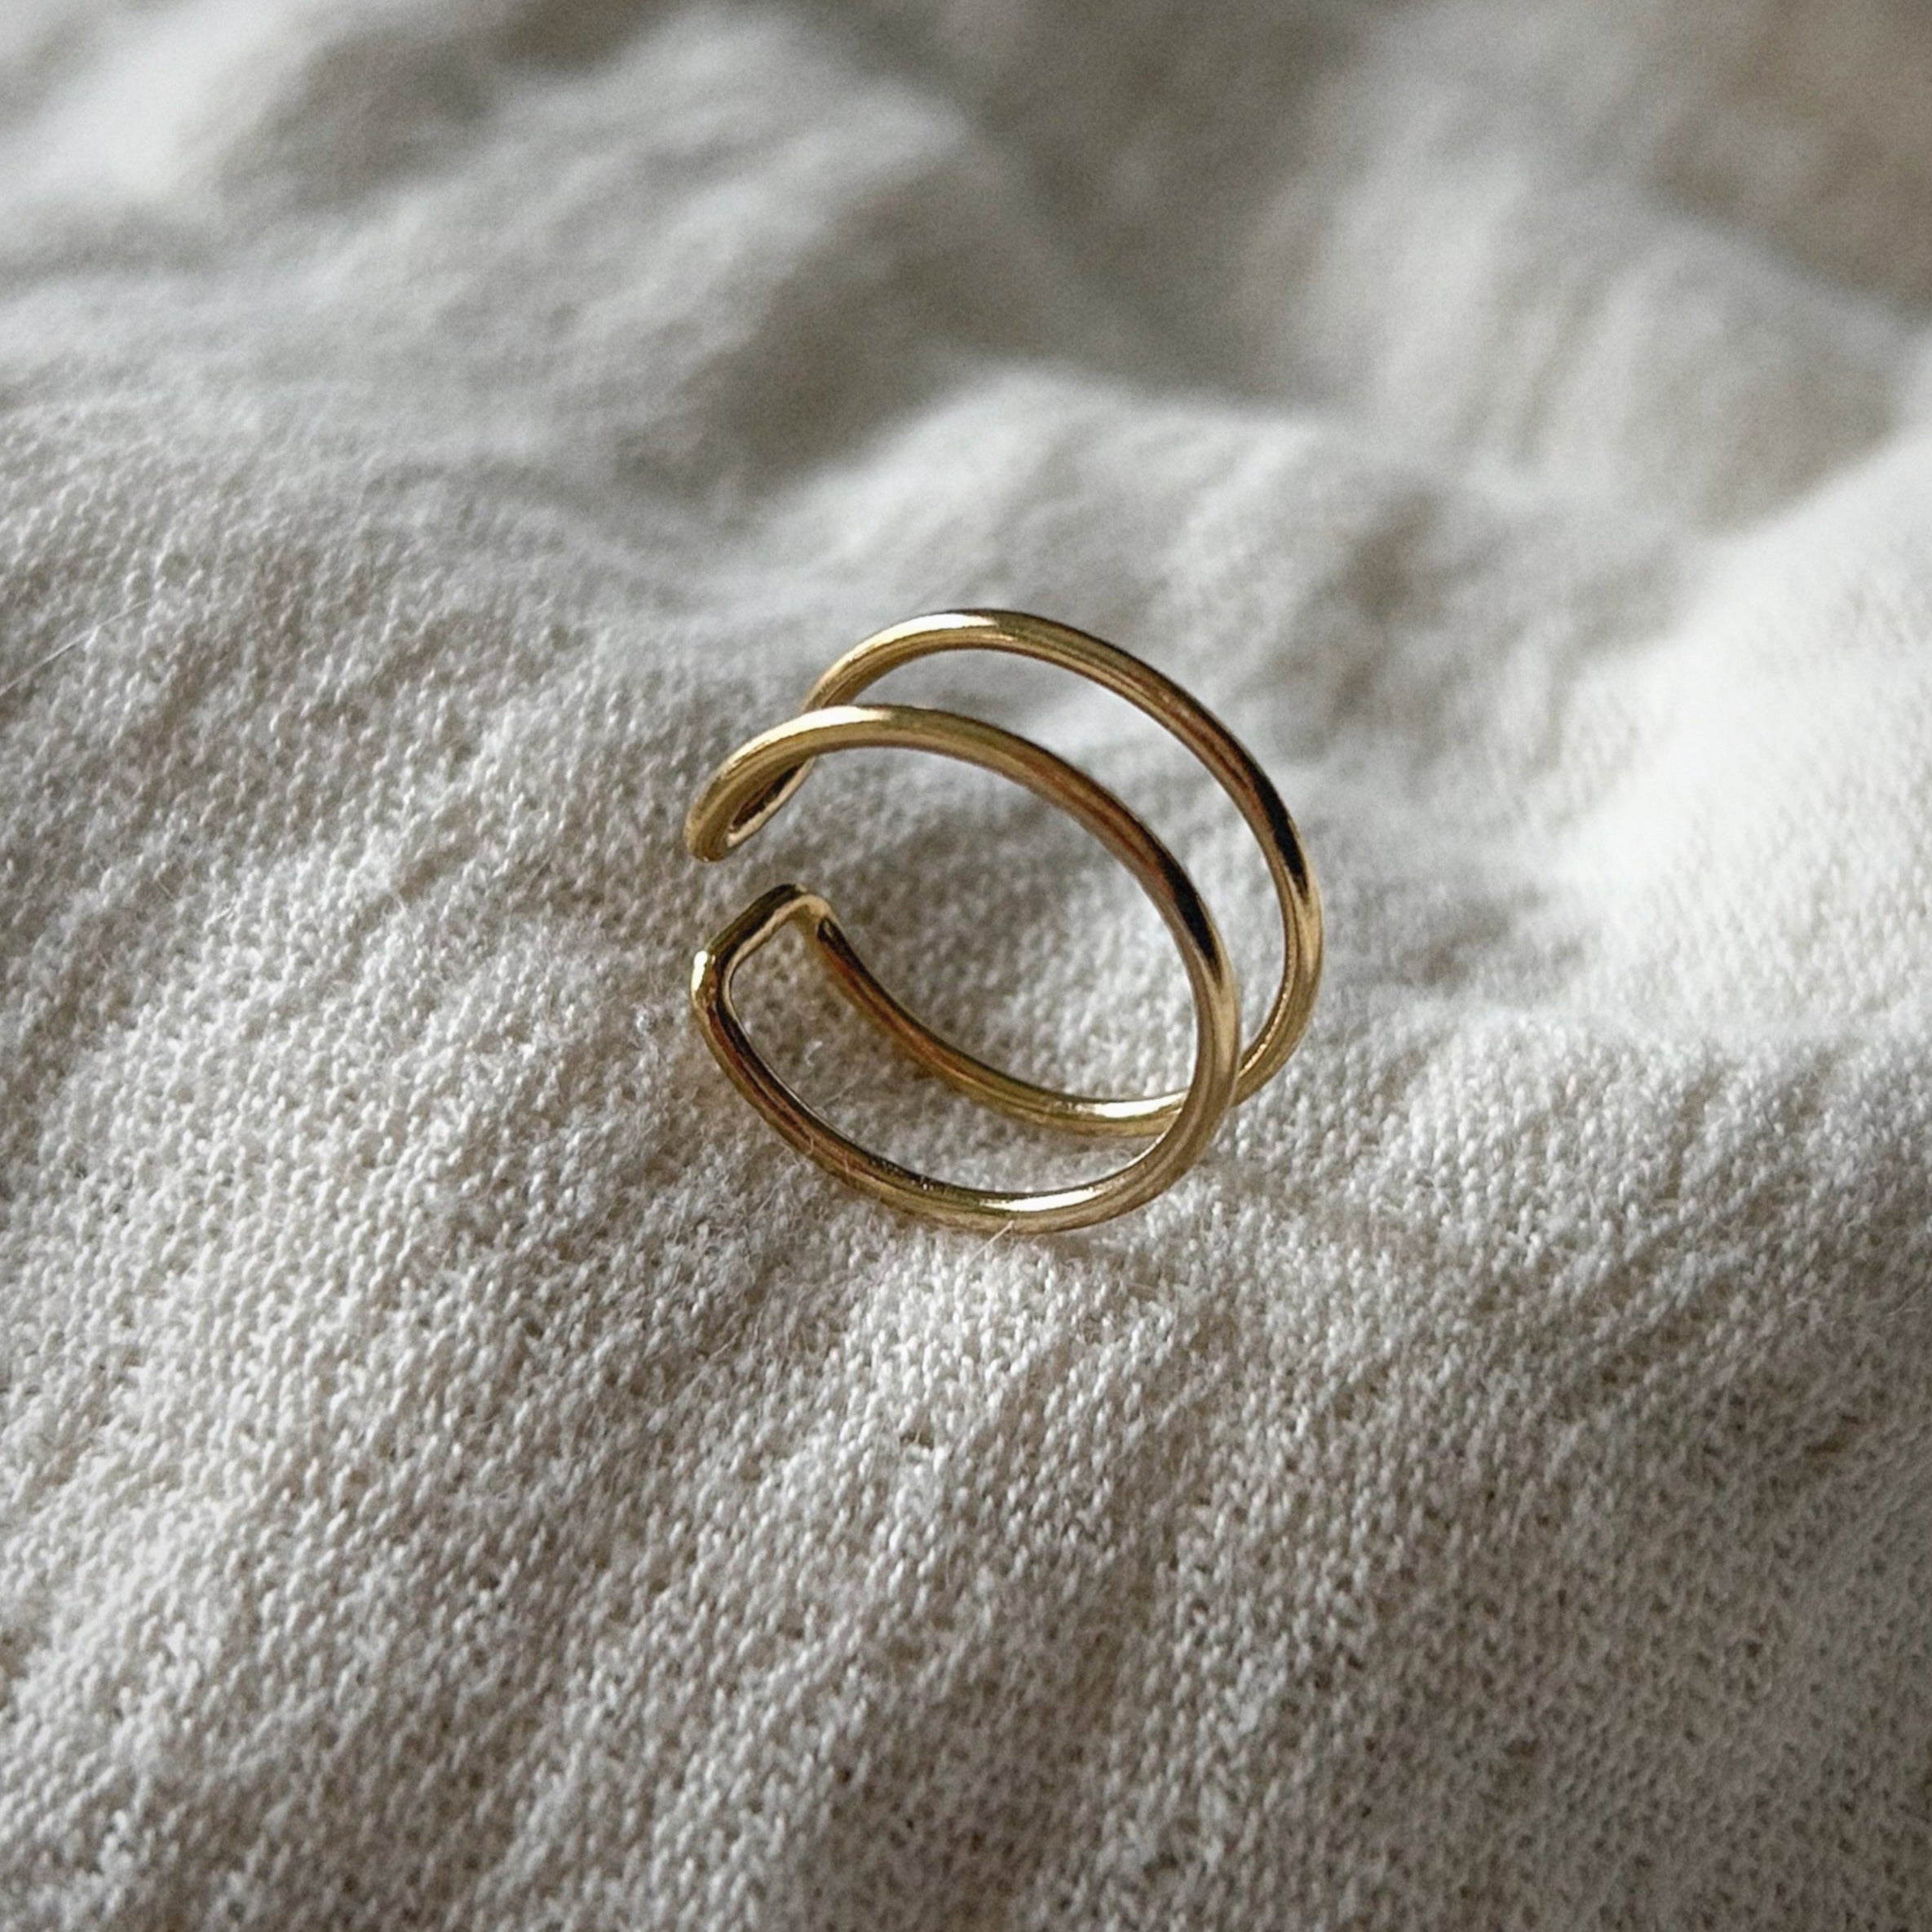 The Duo Cuff Stacking Ring